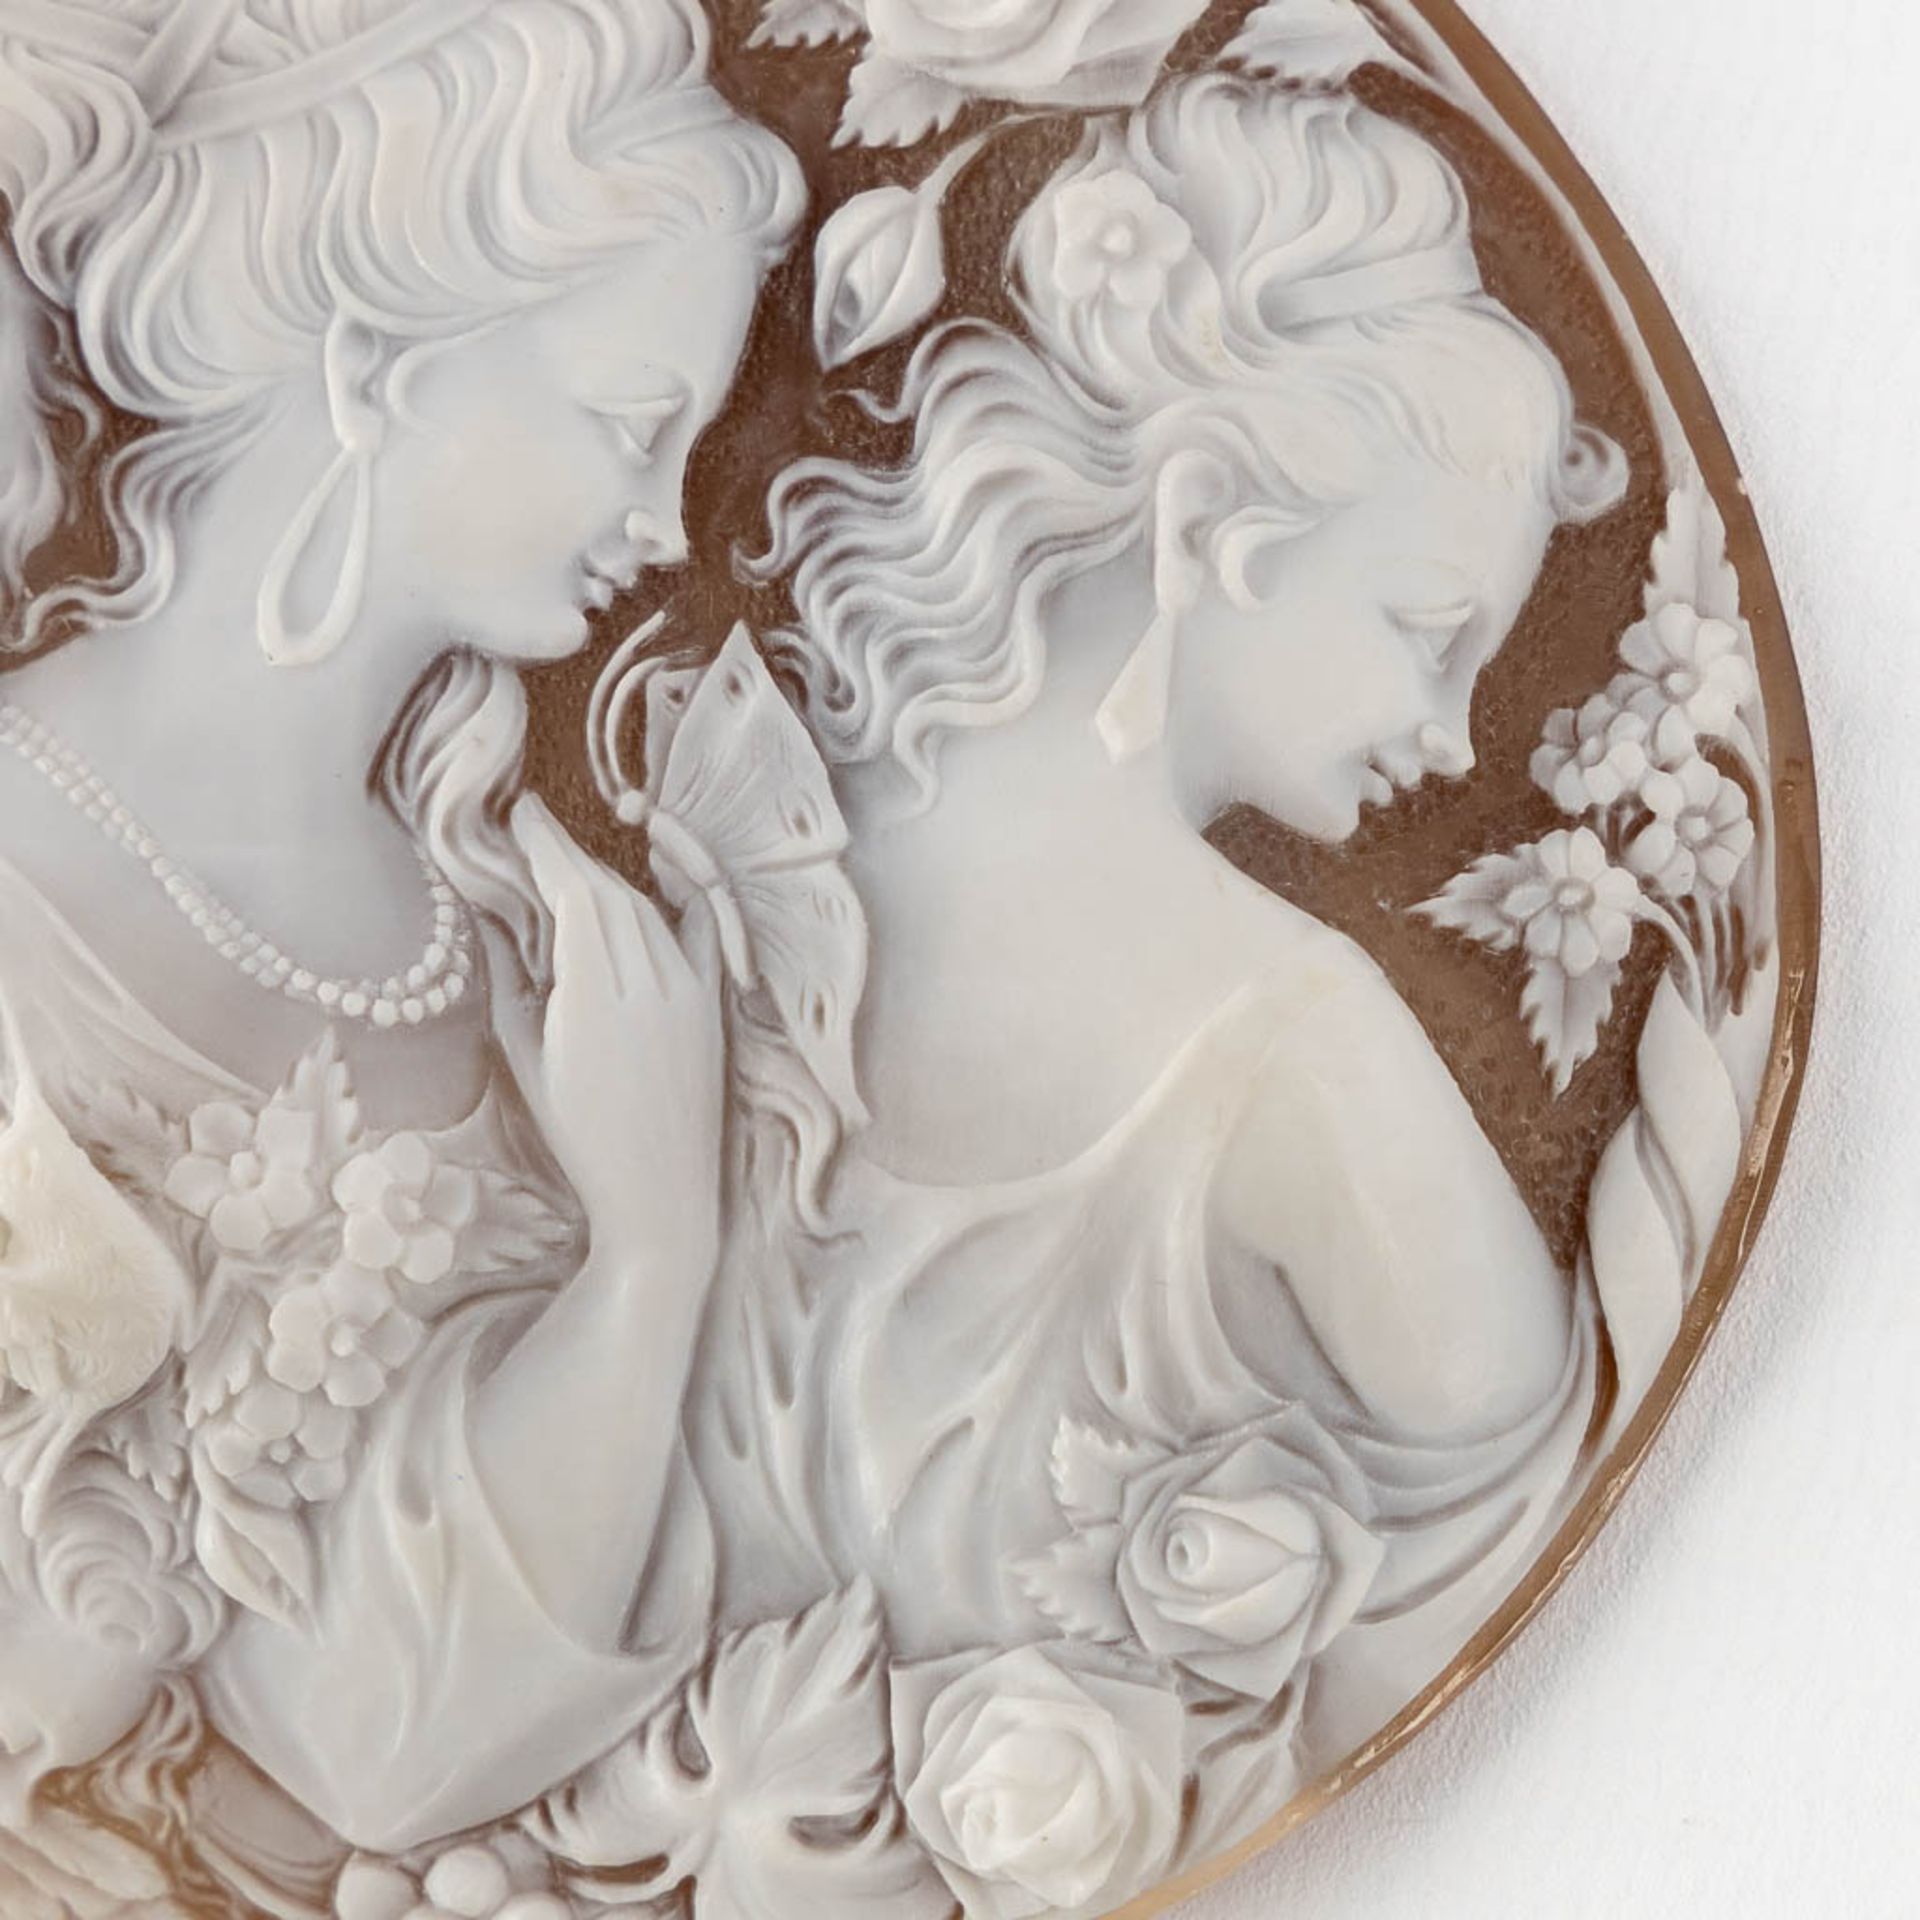 A Cameo, finely sculptured images of Three Graces, Angels and floral decor. (W: 9 x H:12,5 cm) - Image 5 of 9